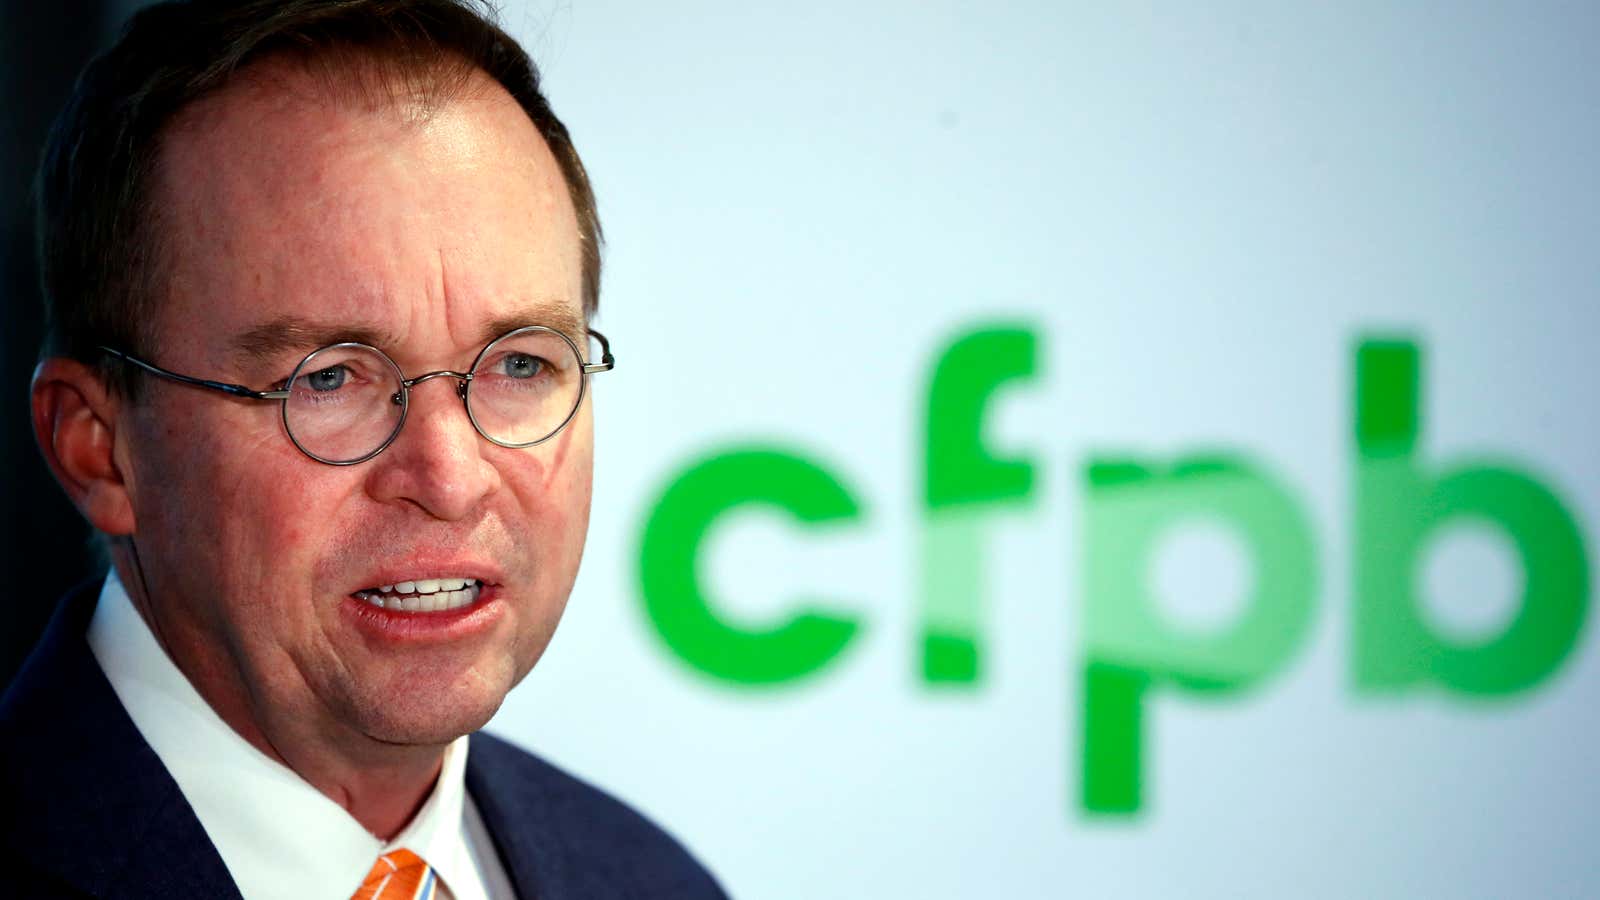 Mick Mulvaney, Trump’s first appointment to lead the Consumer Financial Protection Bureau.